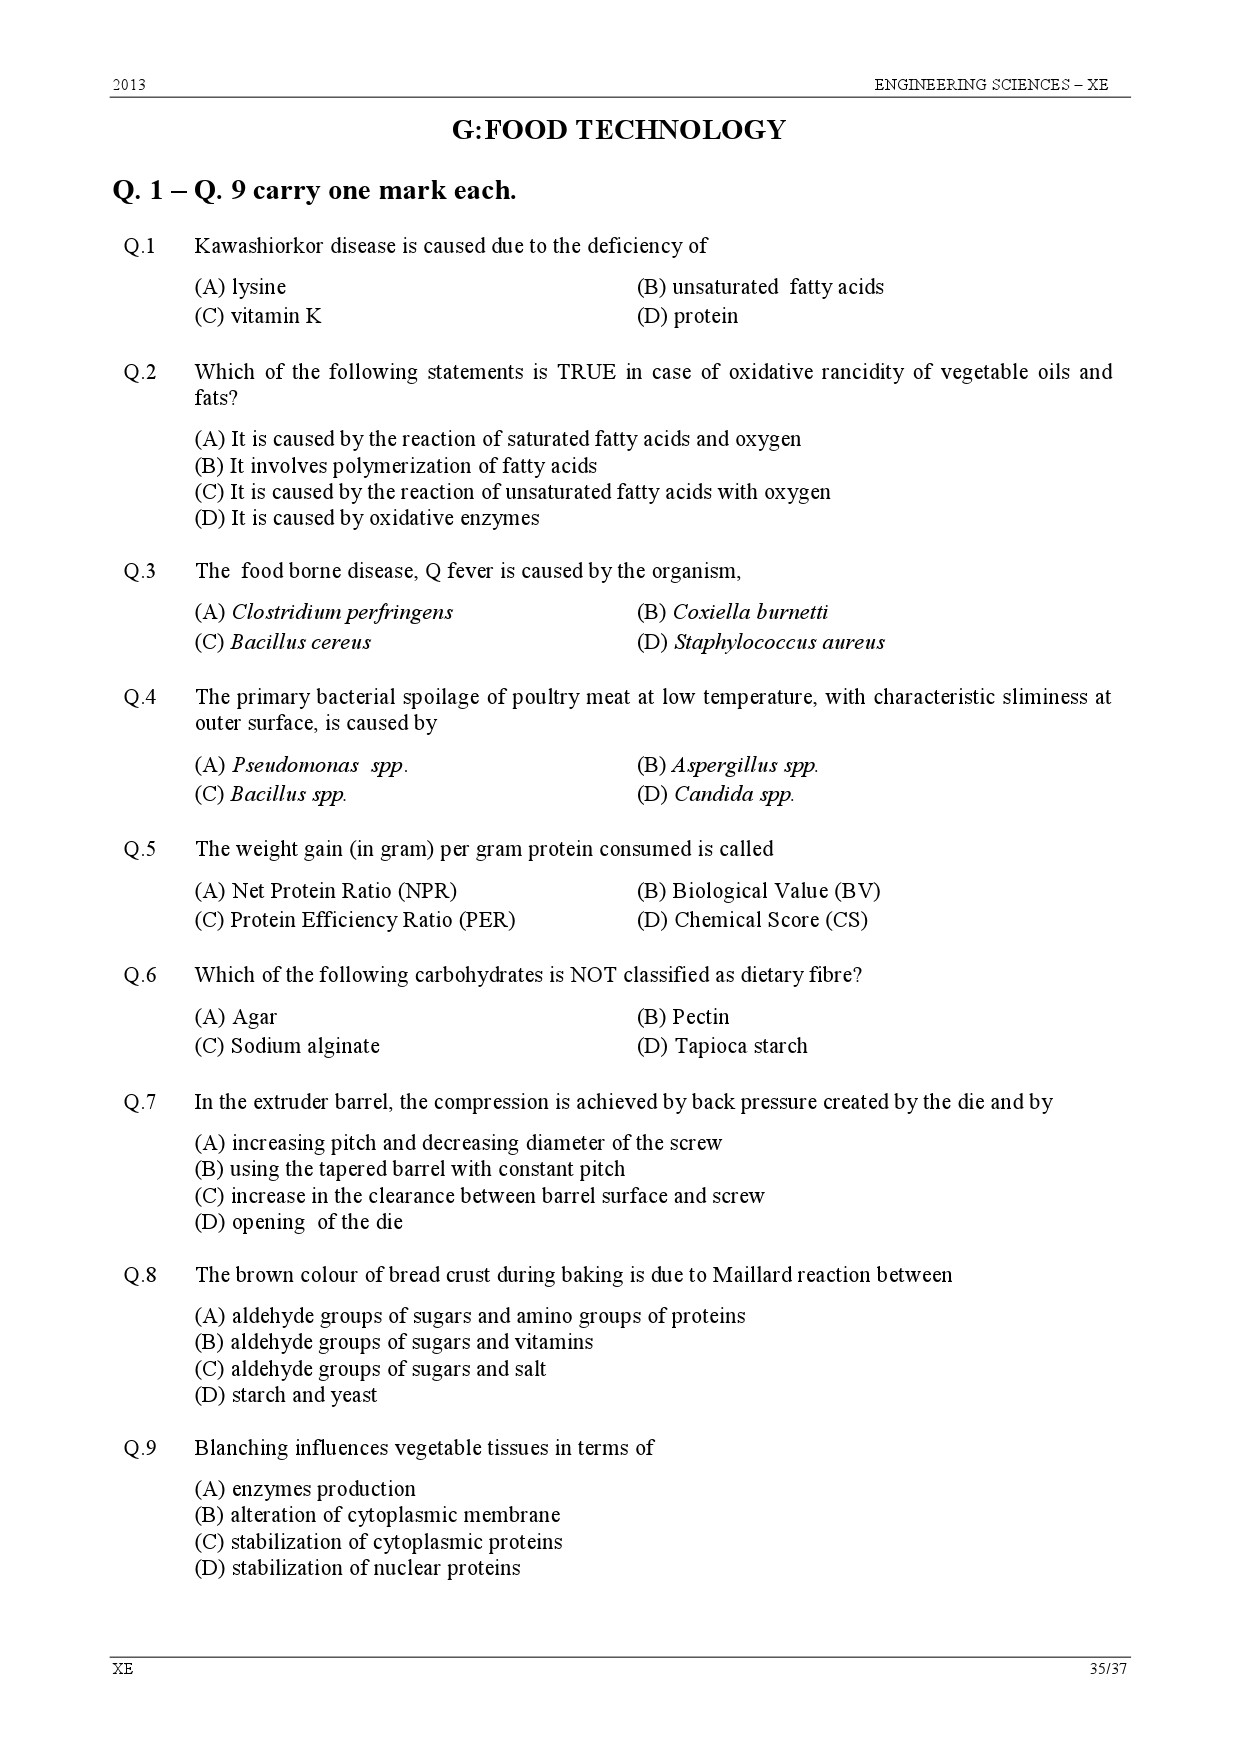 GATE Exam Question Paper 2013 Engineering Sciences 35